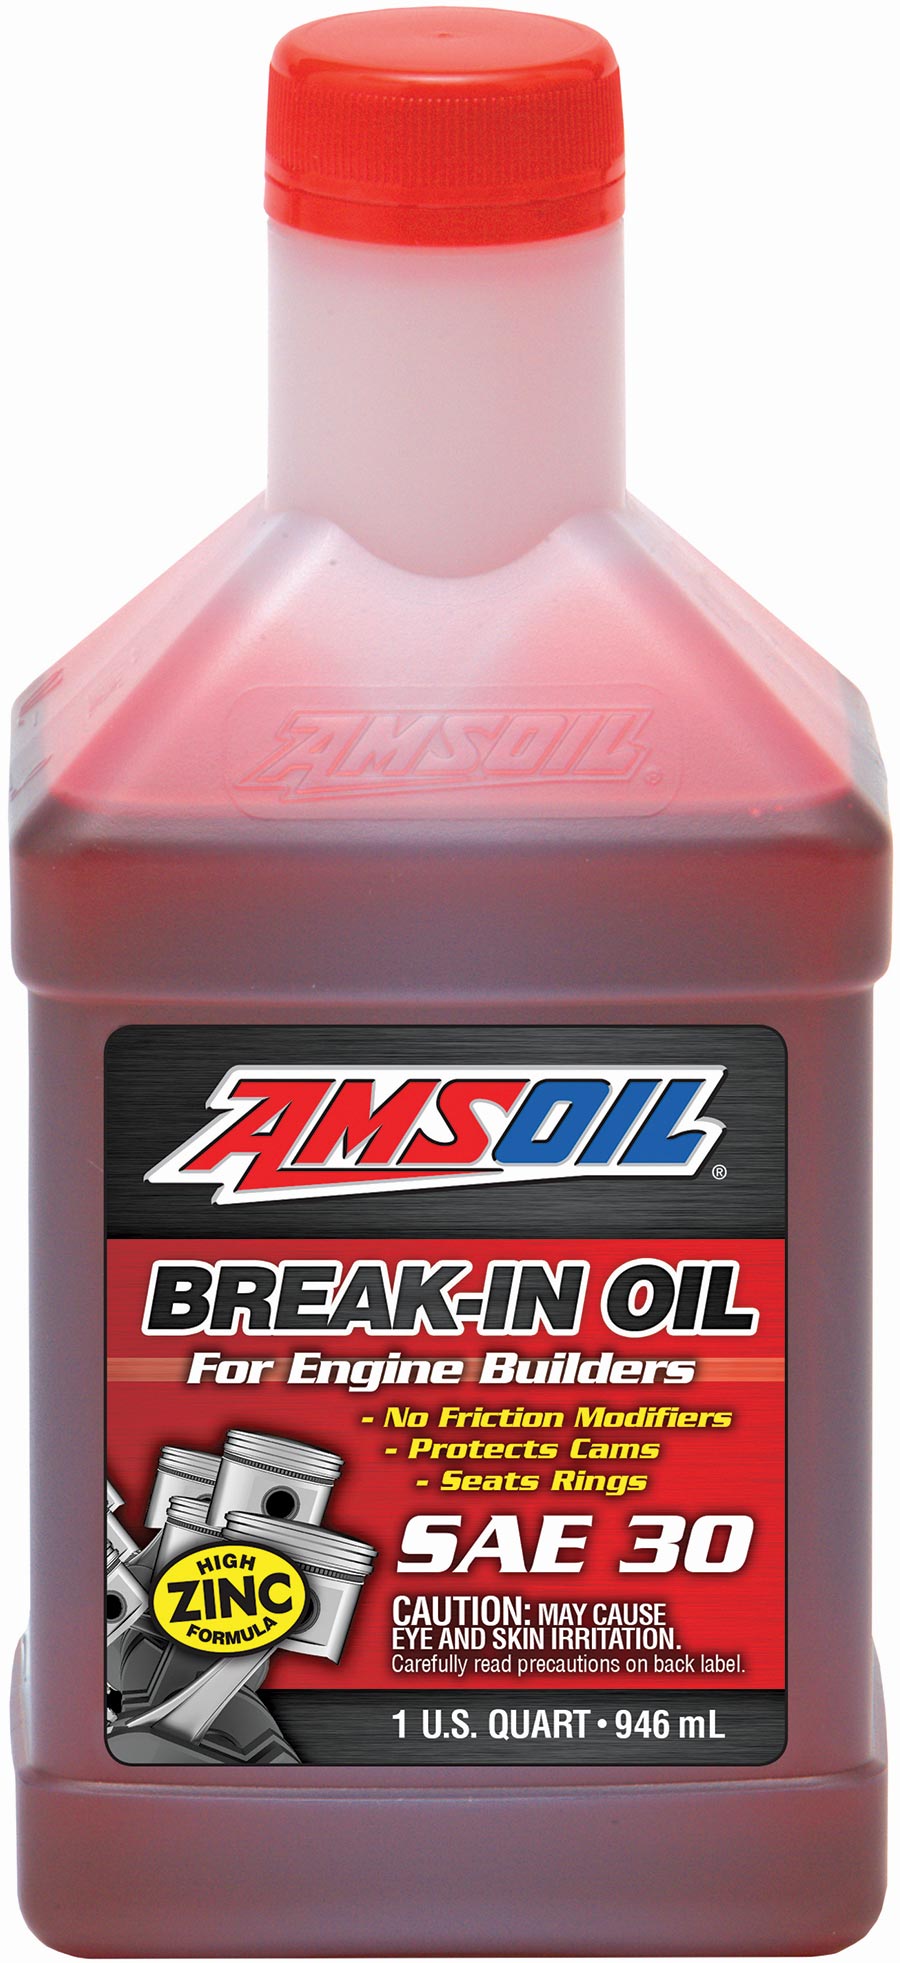 Break-In oil isn’t just for flat tappet engines. AMSOIL Break-In oil quickly seats piston rings and protects piston pins and valvetrain components with zinc and phosphorus.